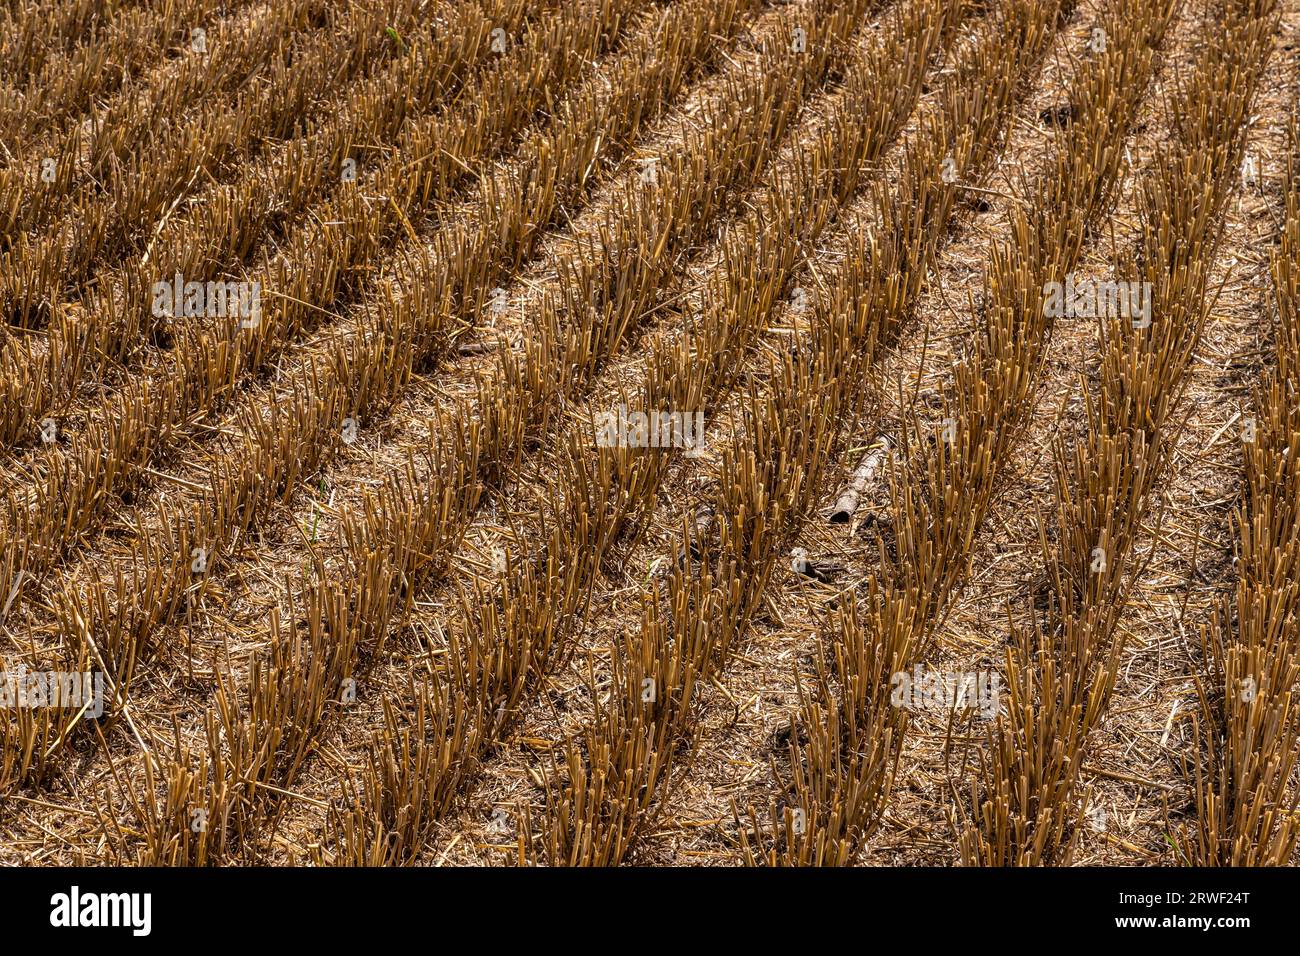 Stubble in the field after harvest. Cut stalks of cereals in the field in summer. Slender rows of grain crops on a summer day in the field. Close-up, Stock Photo